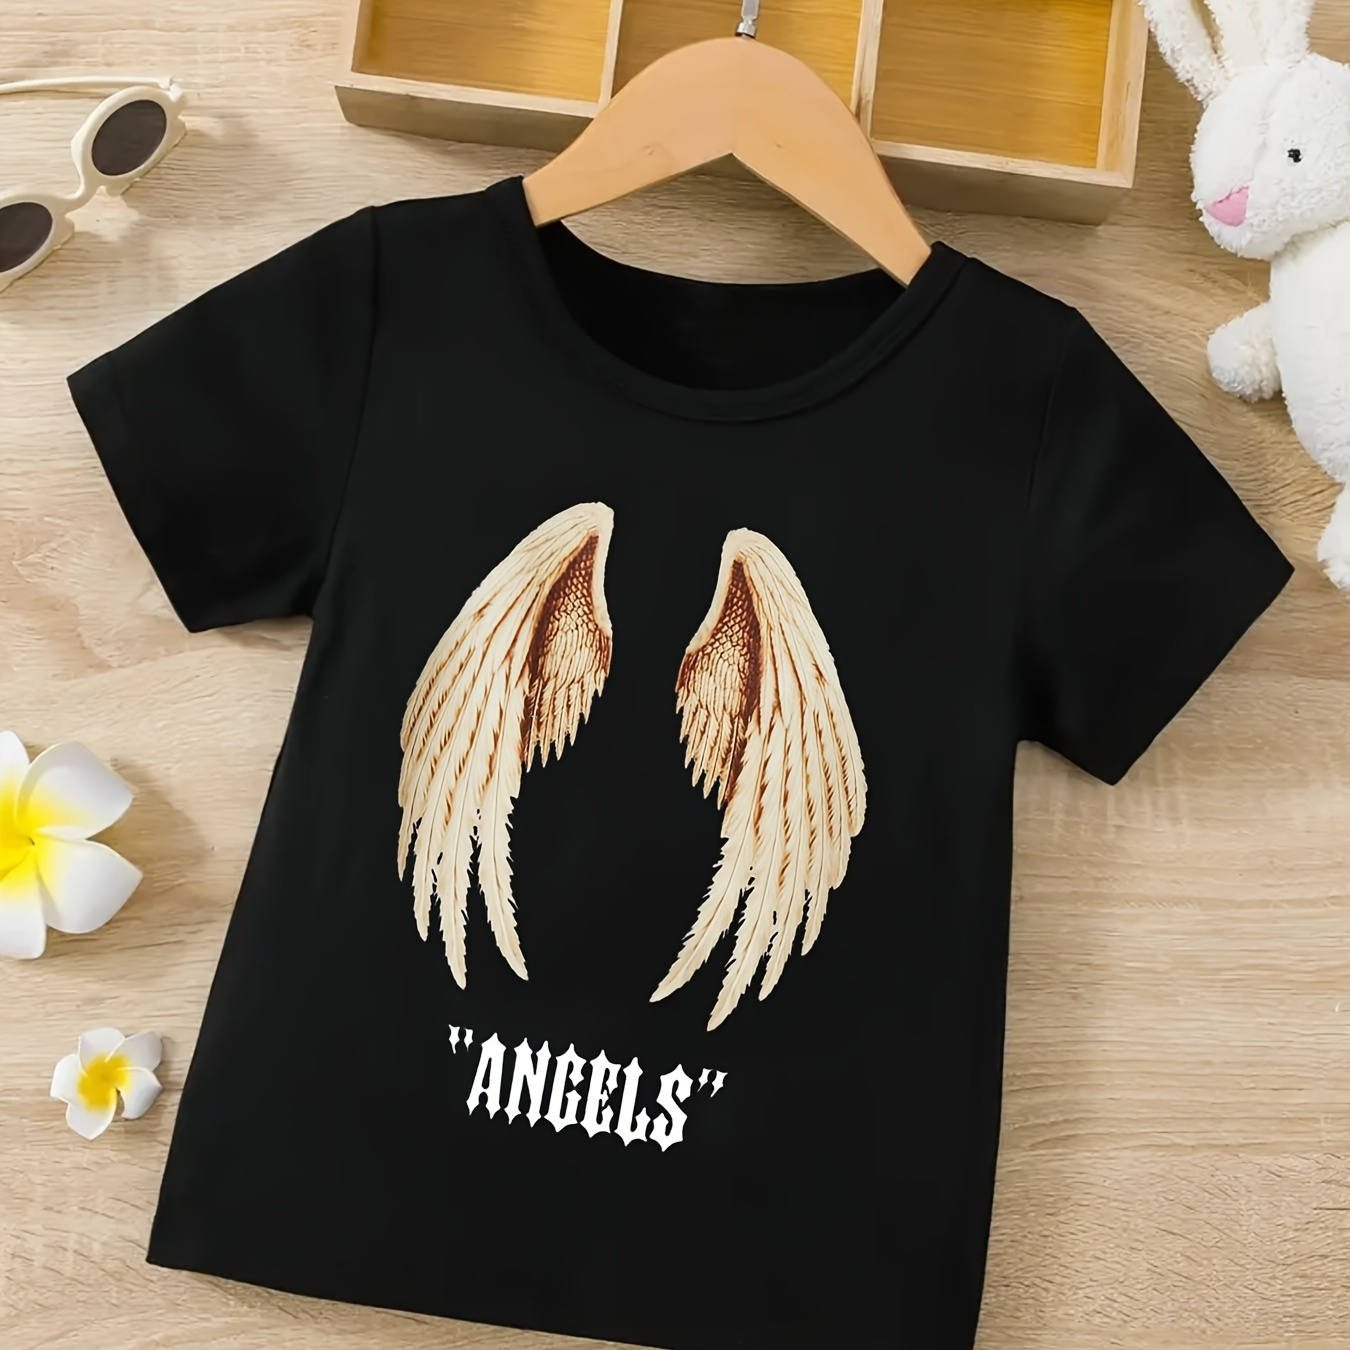 

Angles & Wings Graphic Print Boy's Creative T-shirt, Casual Short Sleeve Crew Neck Top, Boy's Summer Clothing